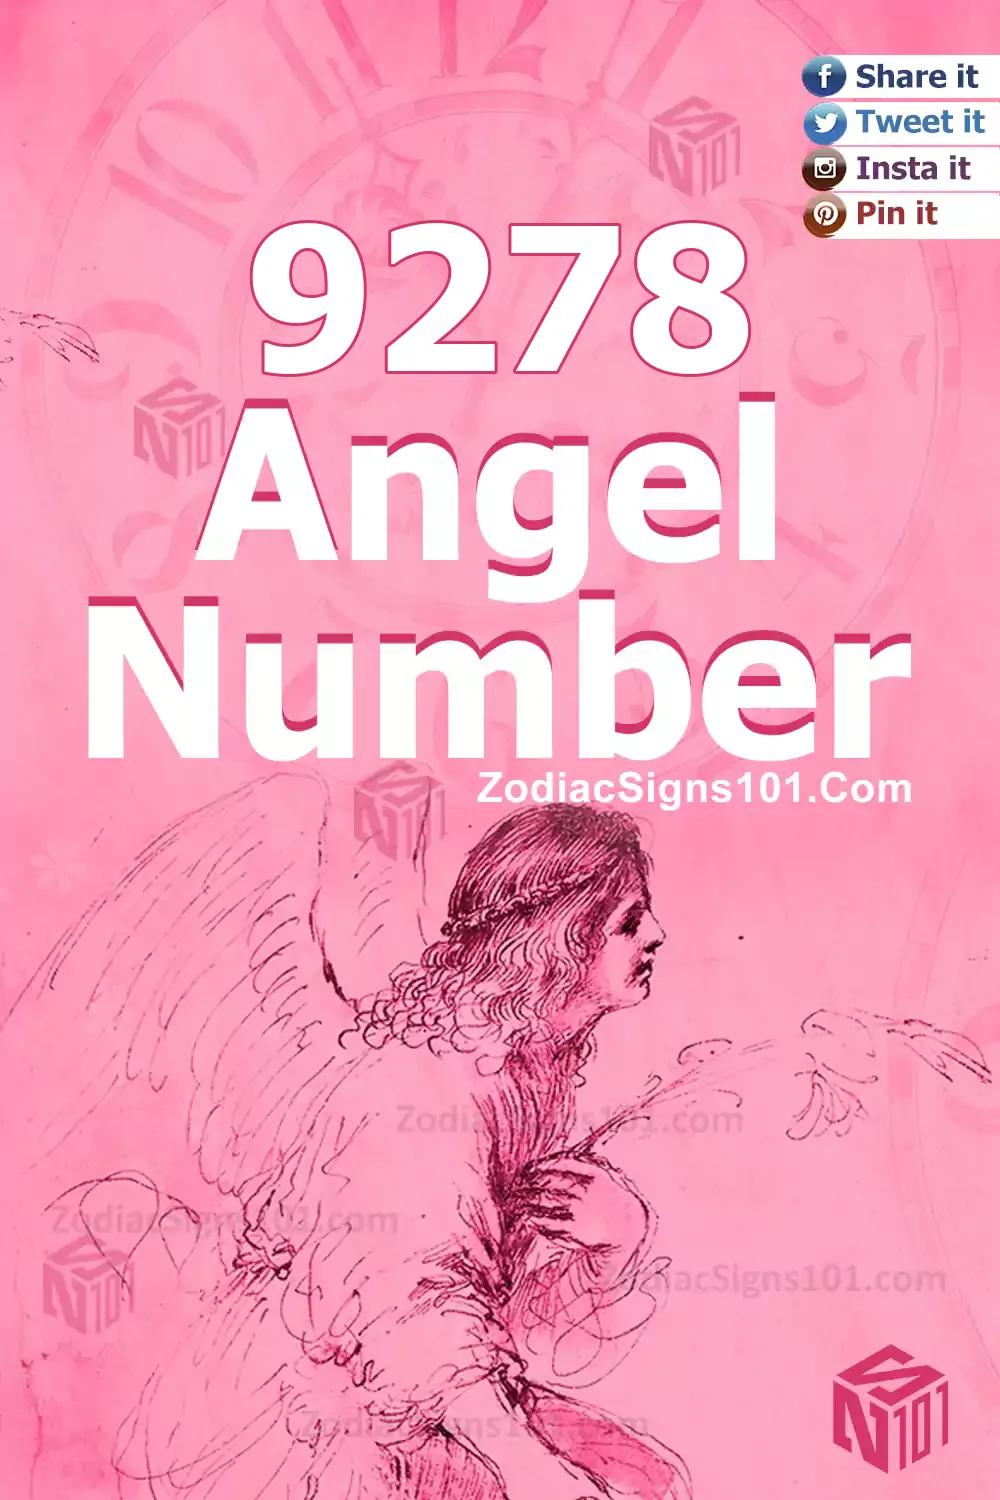 9278 Angel Number Meaning